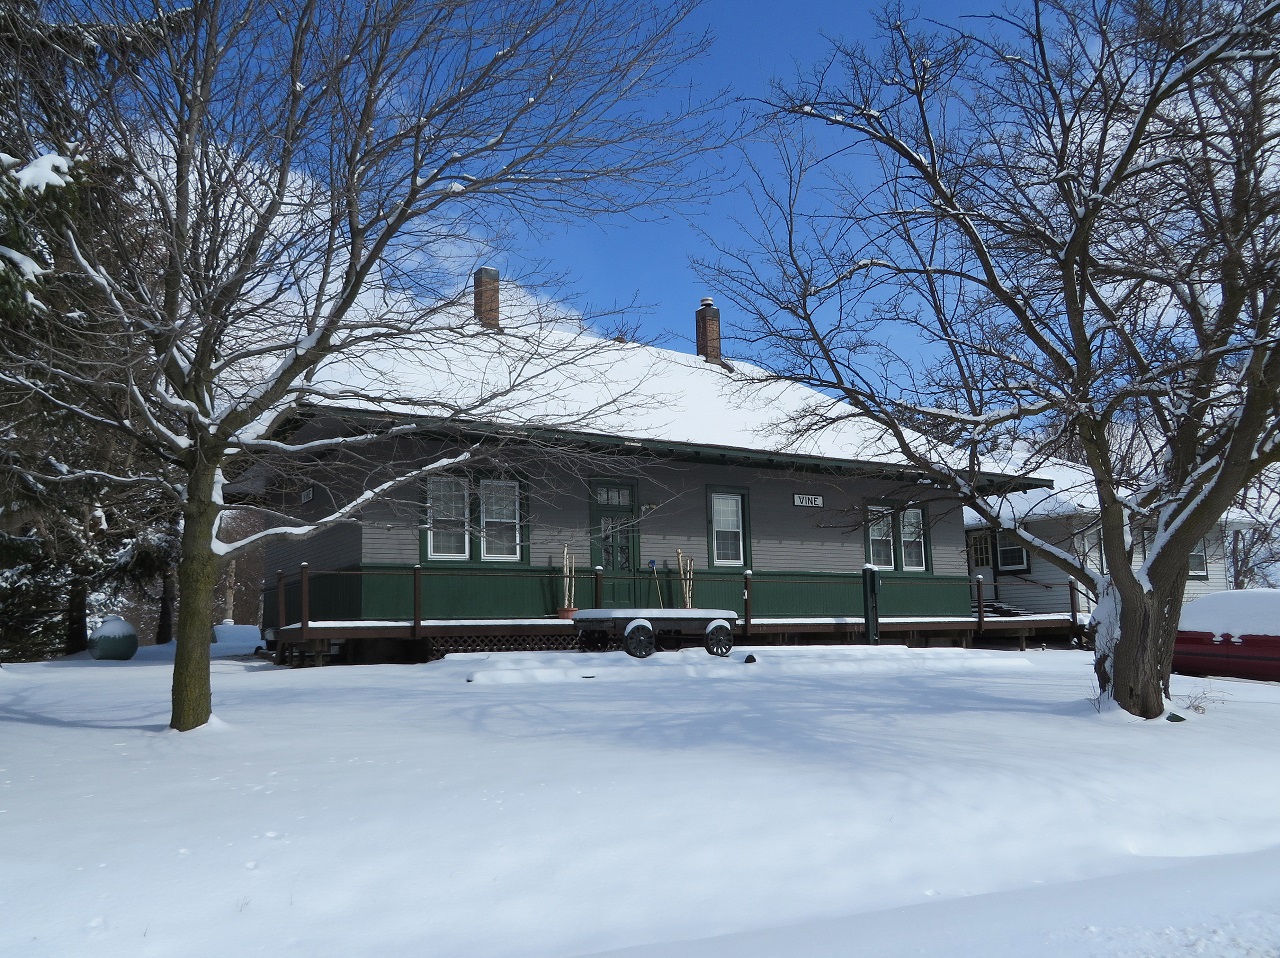 The former CN Vine station adjacent to the Barrie-Collingwood railway's Beeton Spur is now a residence. It has been rotated 90 degrees from it's original position.